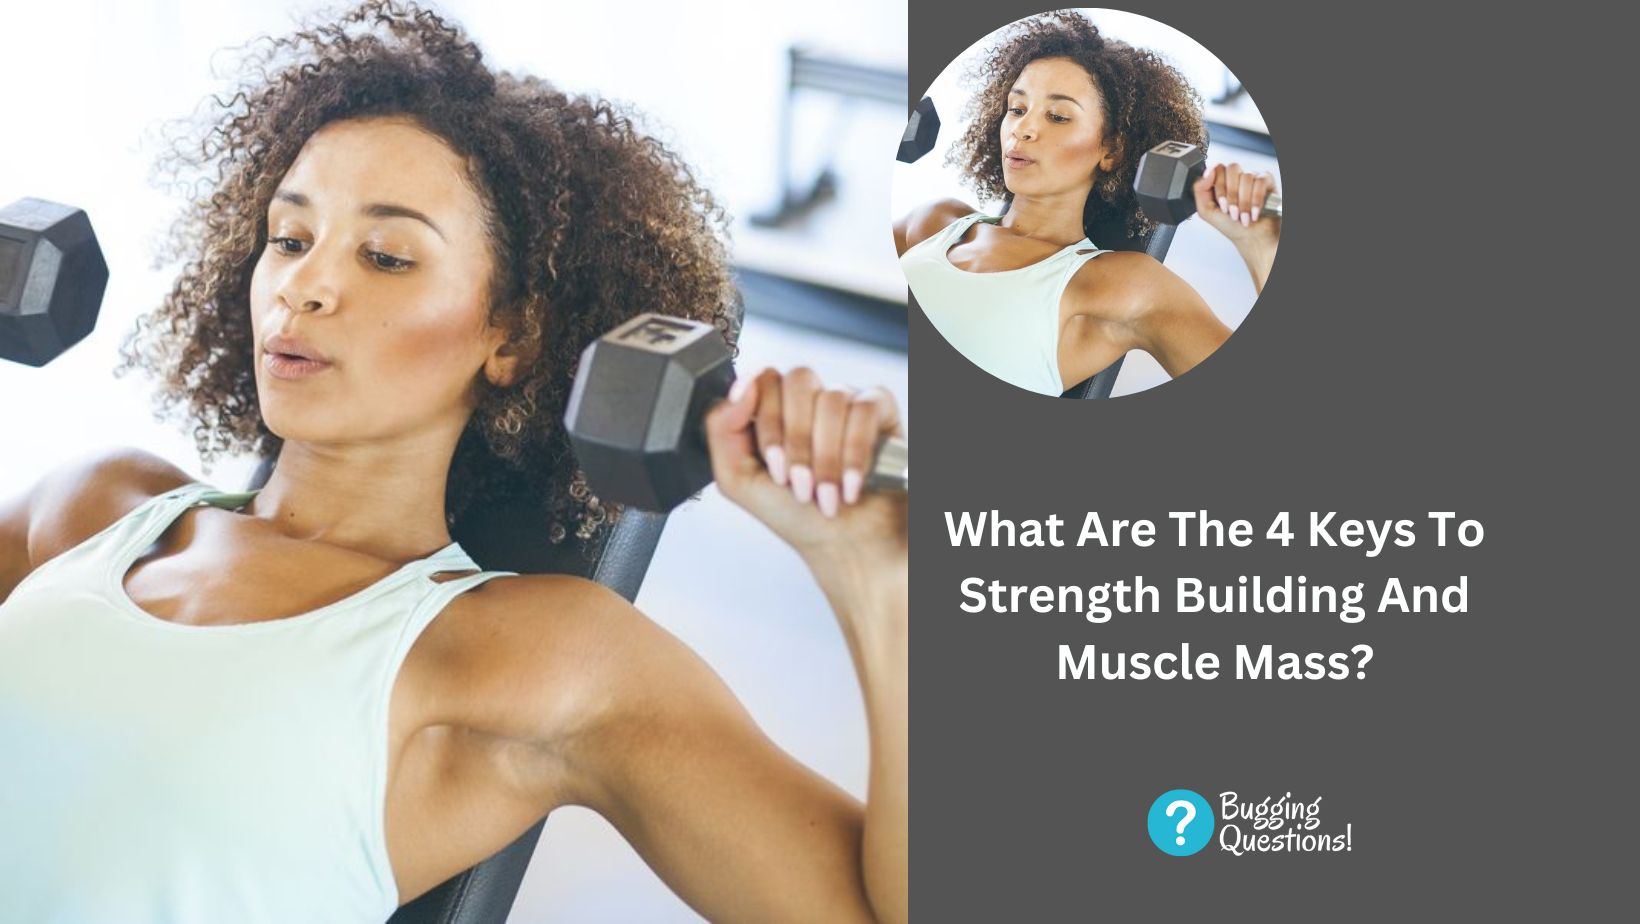 What Are The 4 Keys To Strength Building And Muscle Mass?